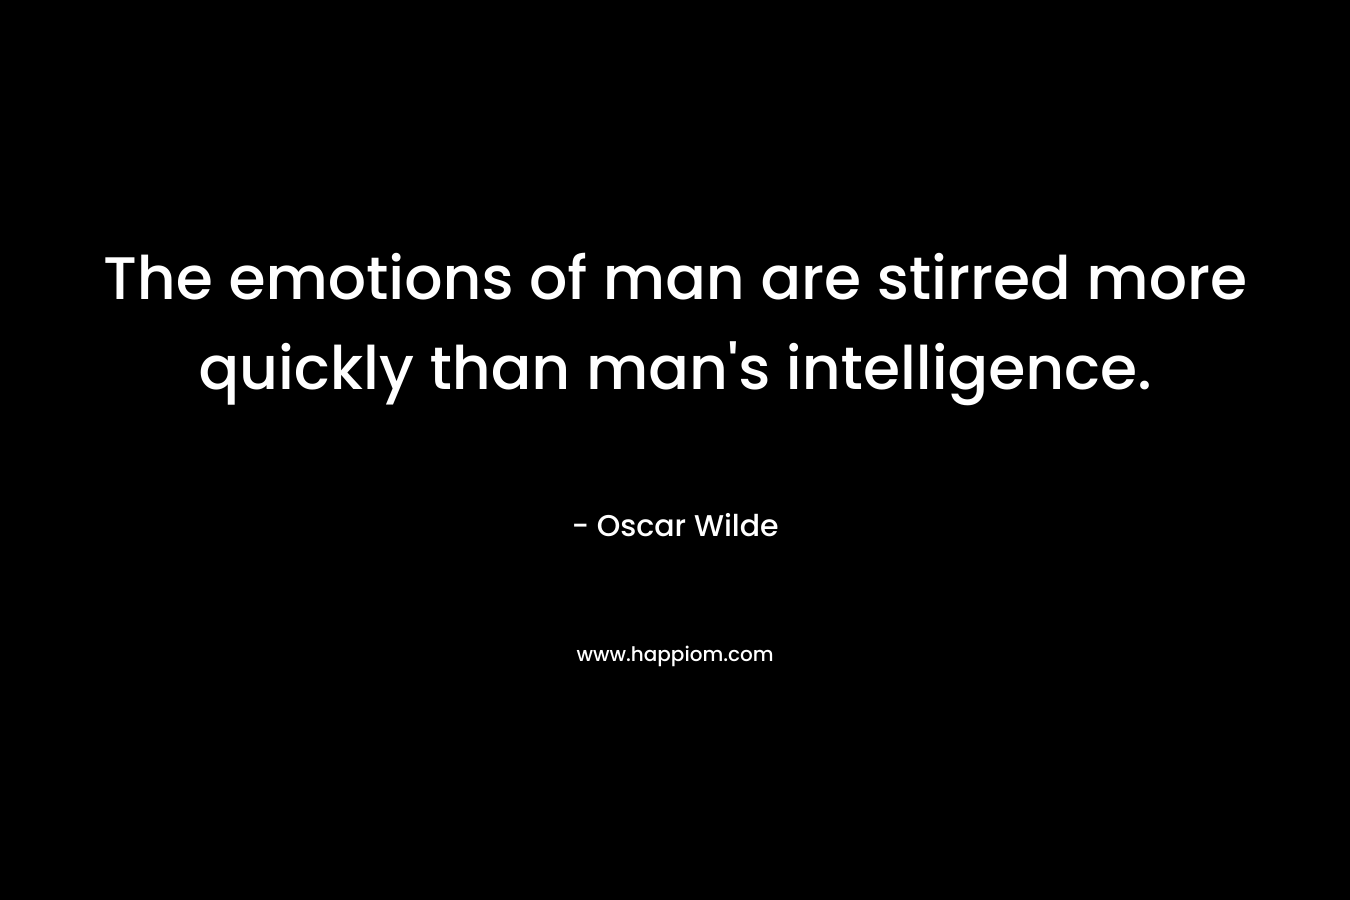 The emotions of man are stirred more quickly than man's intelligence.